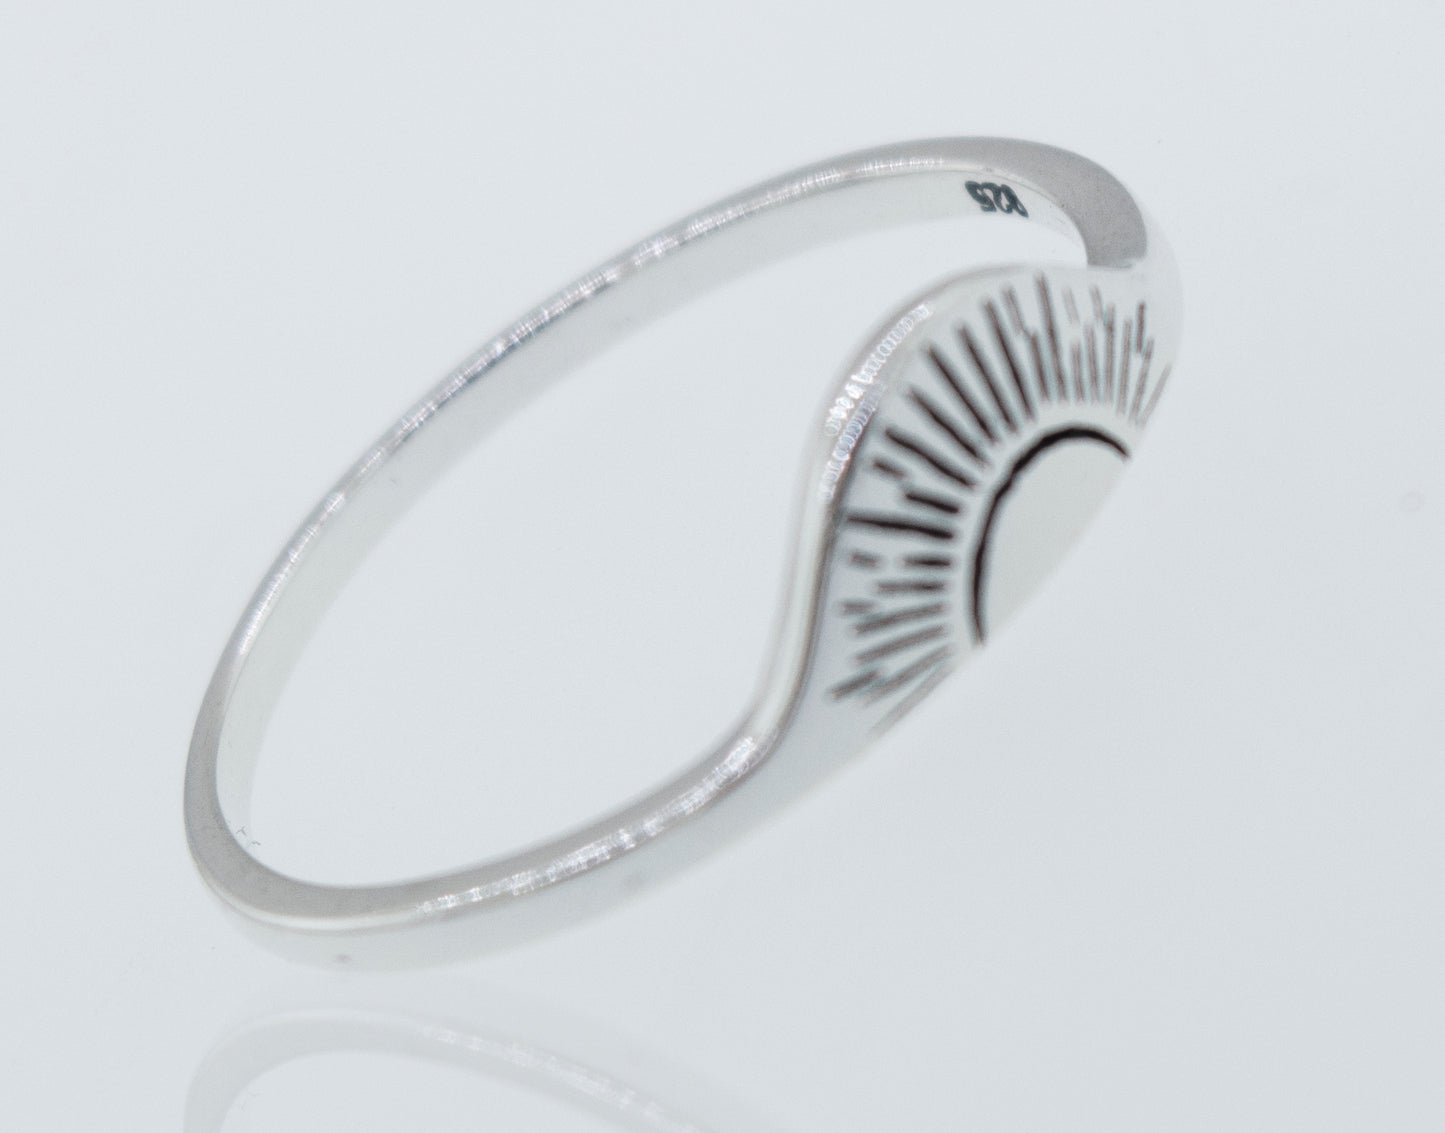 A Super Silver Sunrise Ring, made of 925 sterling silver and featuring a sunburst design, with a high shine finish.